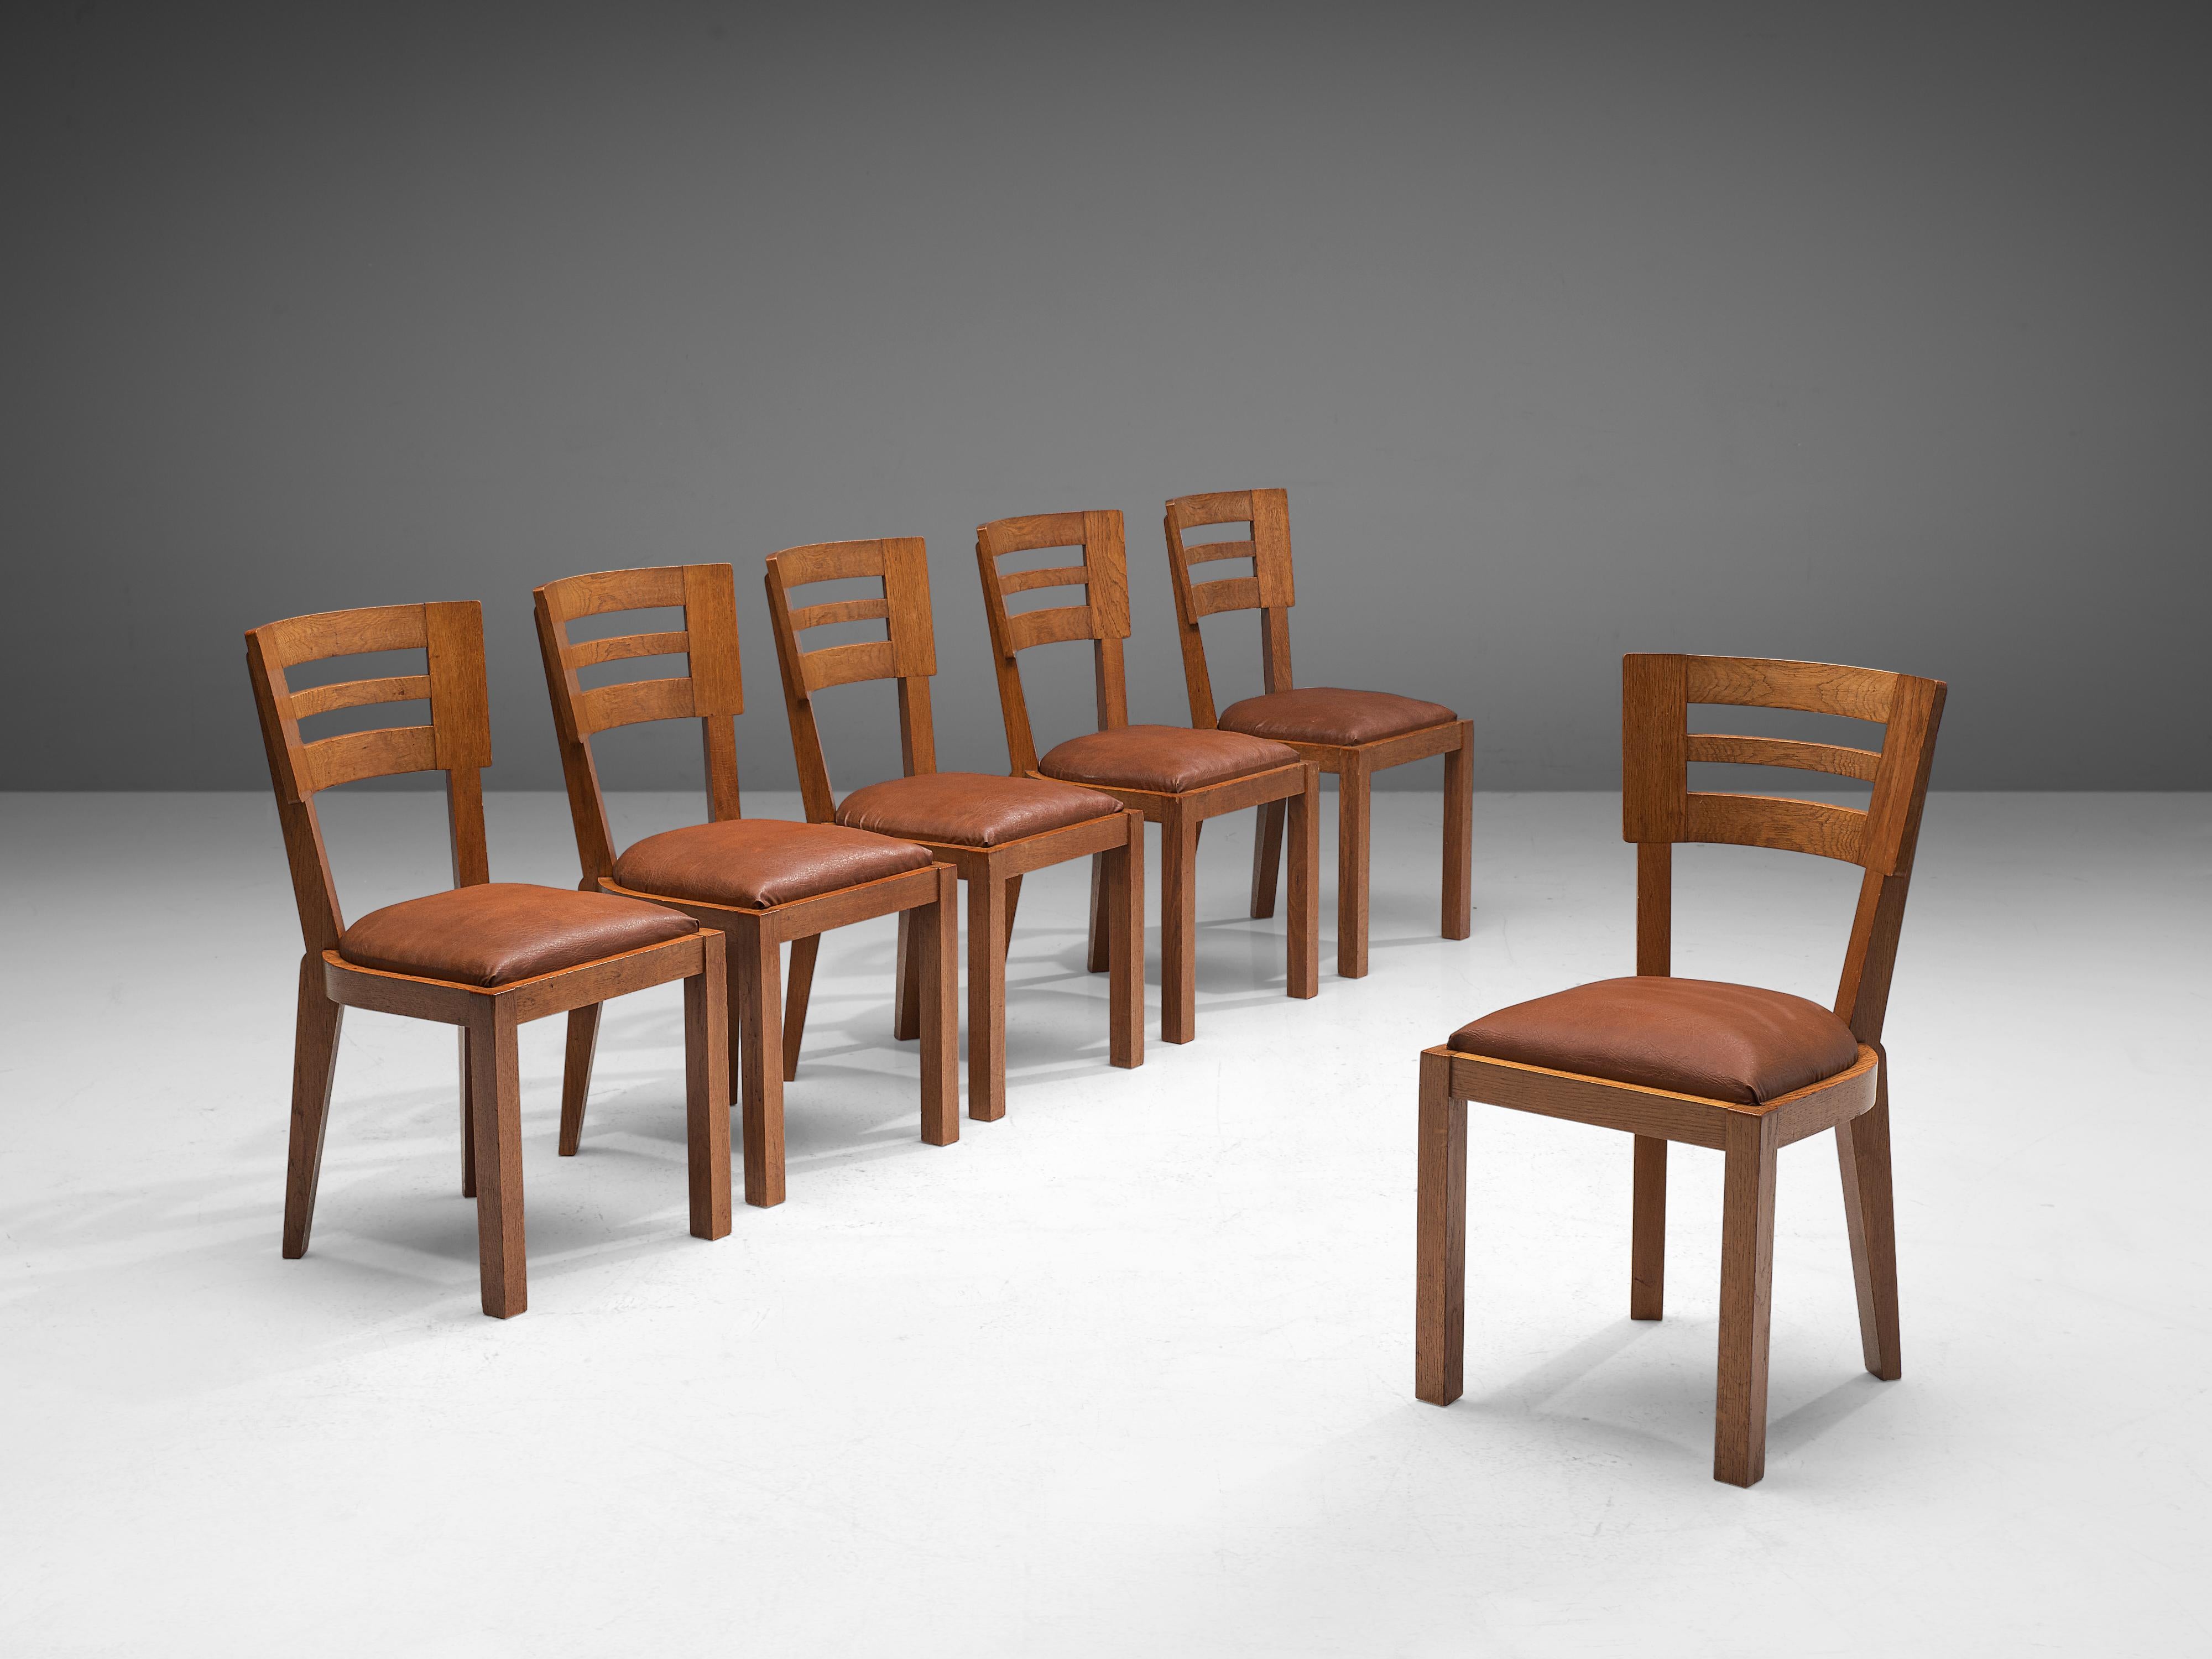 Set of six dining chairs, oak, leather, France, 1940s

Set of six French dining chairs made in the Art Deco period. A characteristic design; simplistic yet very strong in lines and proportions. The backrest embodies a slightly curved shape with two